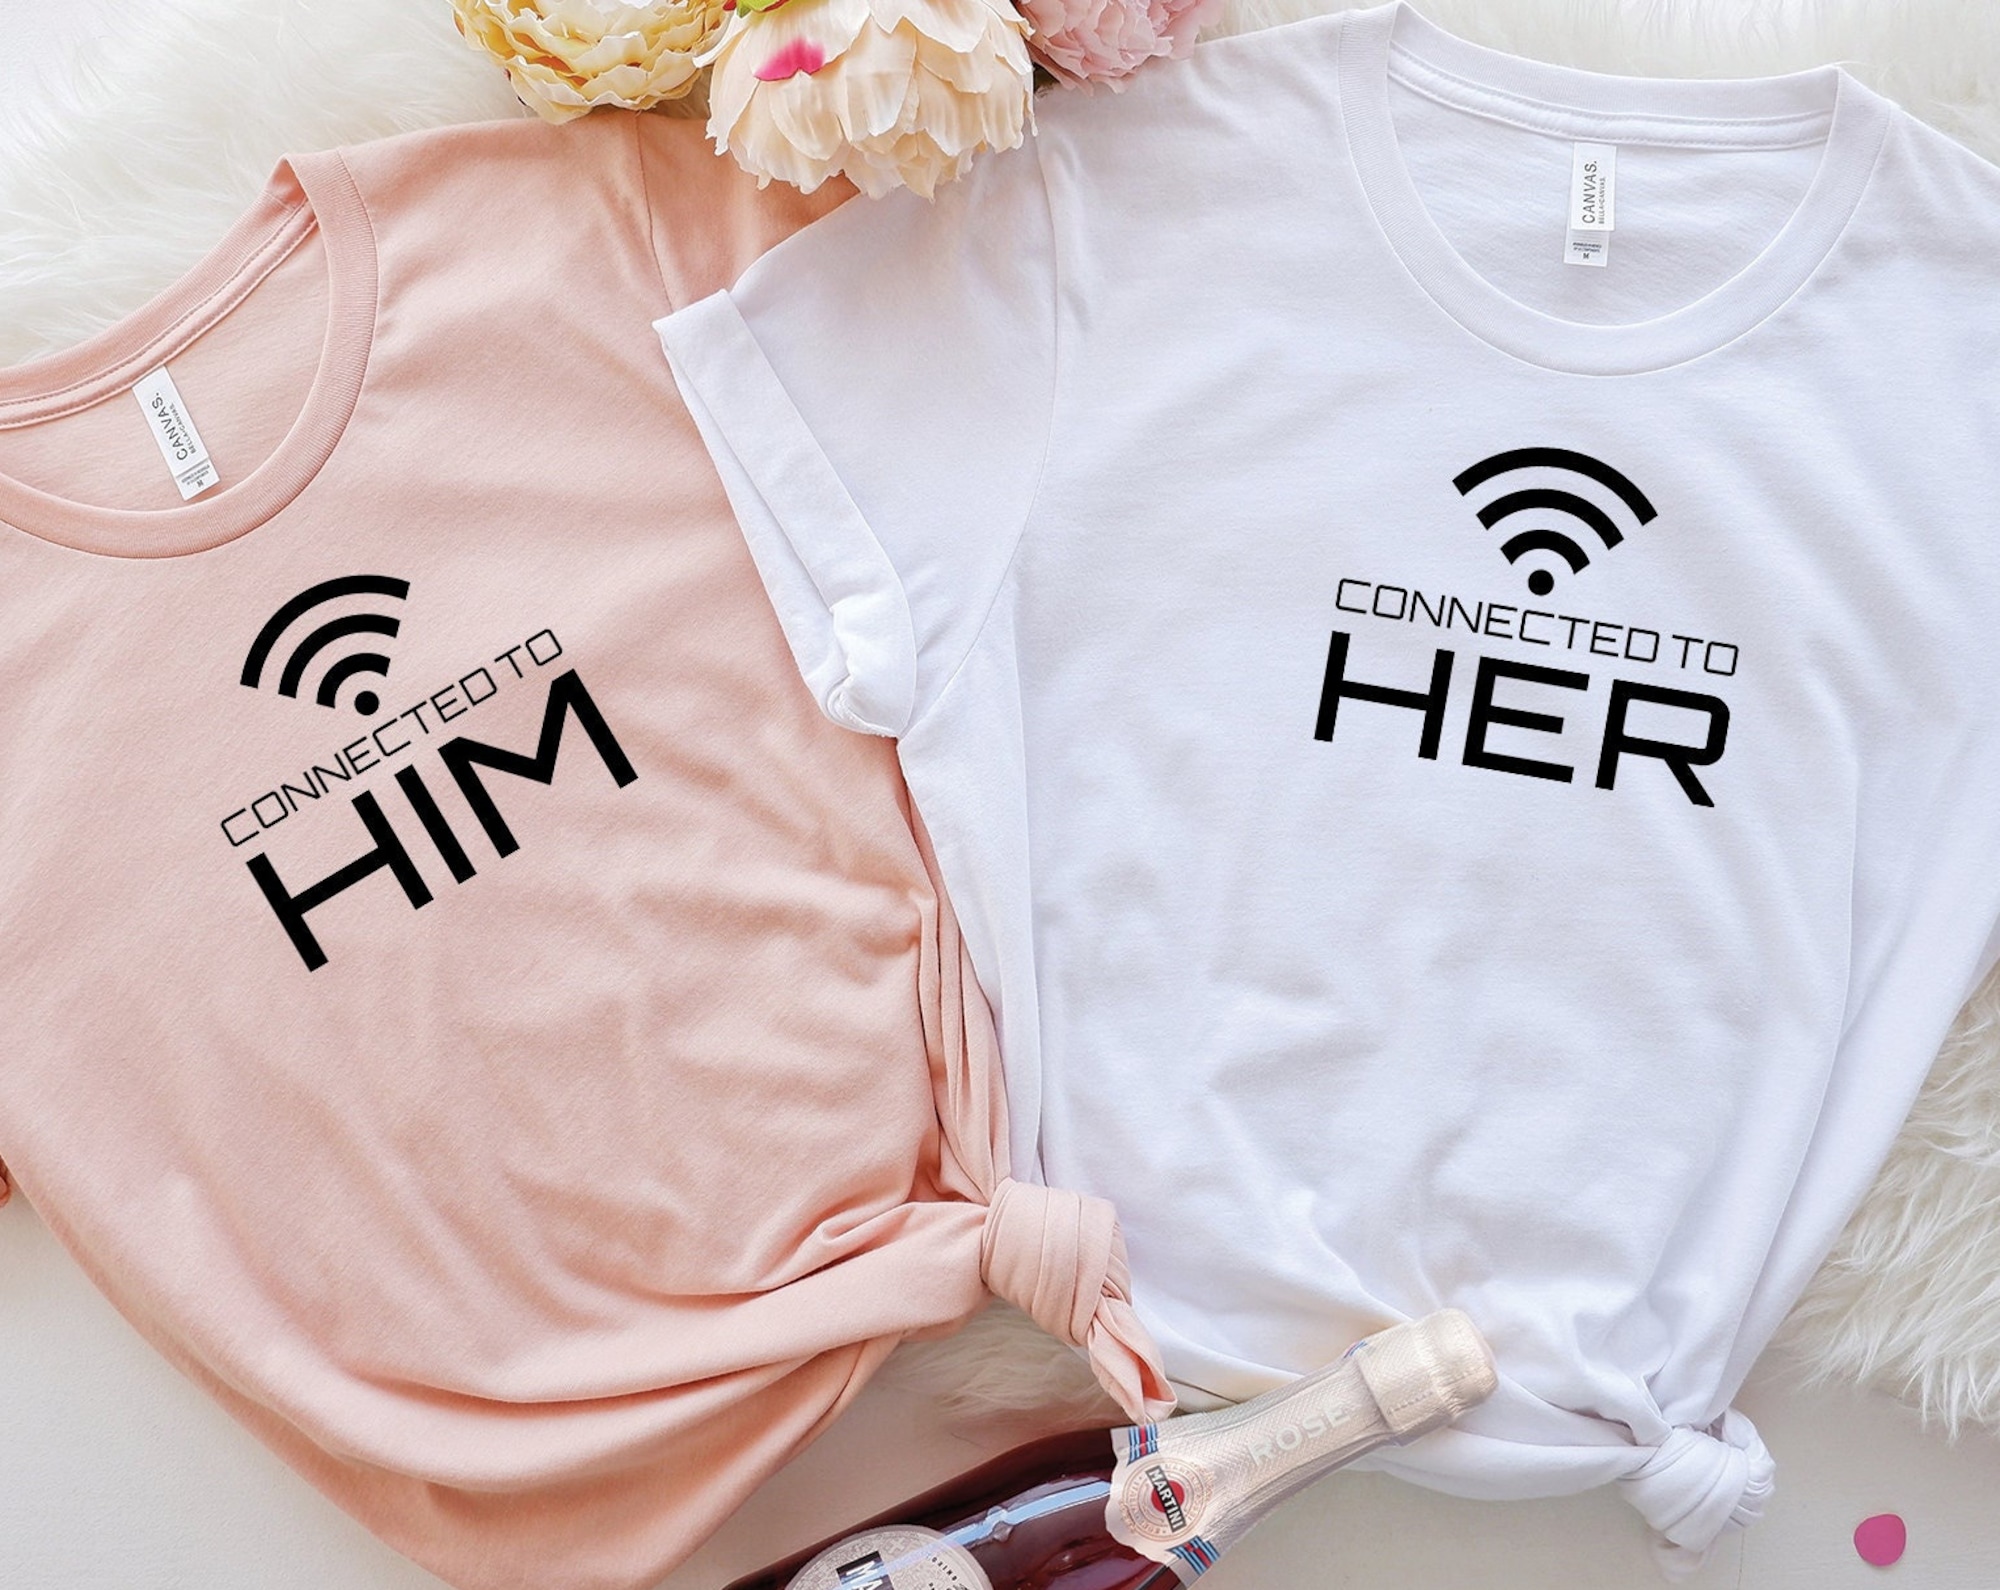 Discover Wifi Couple Shirt, Connected to her, Connected to him